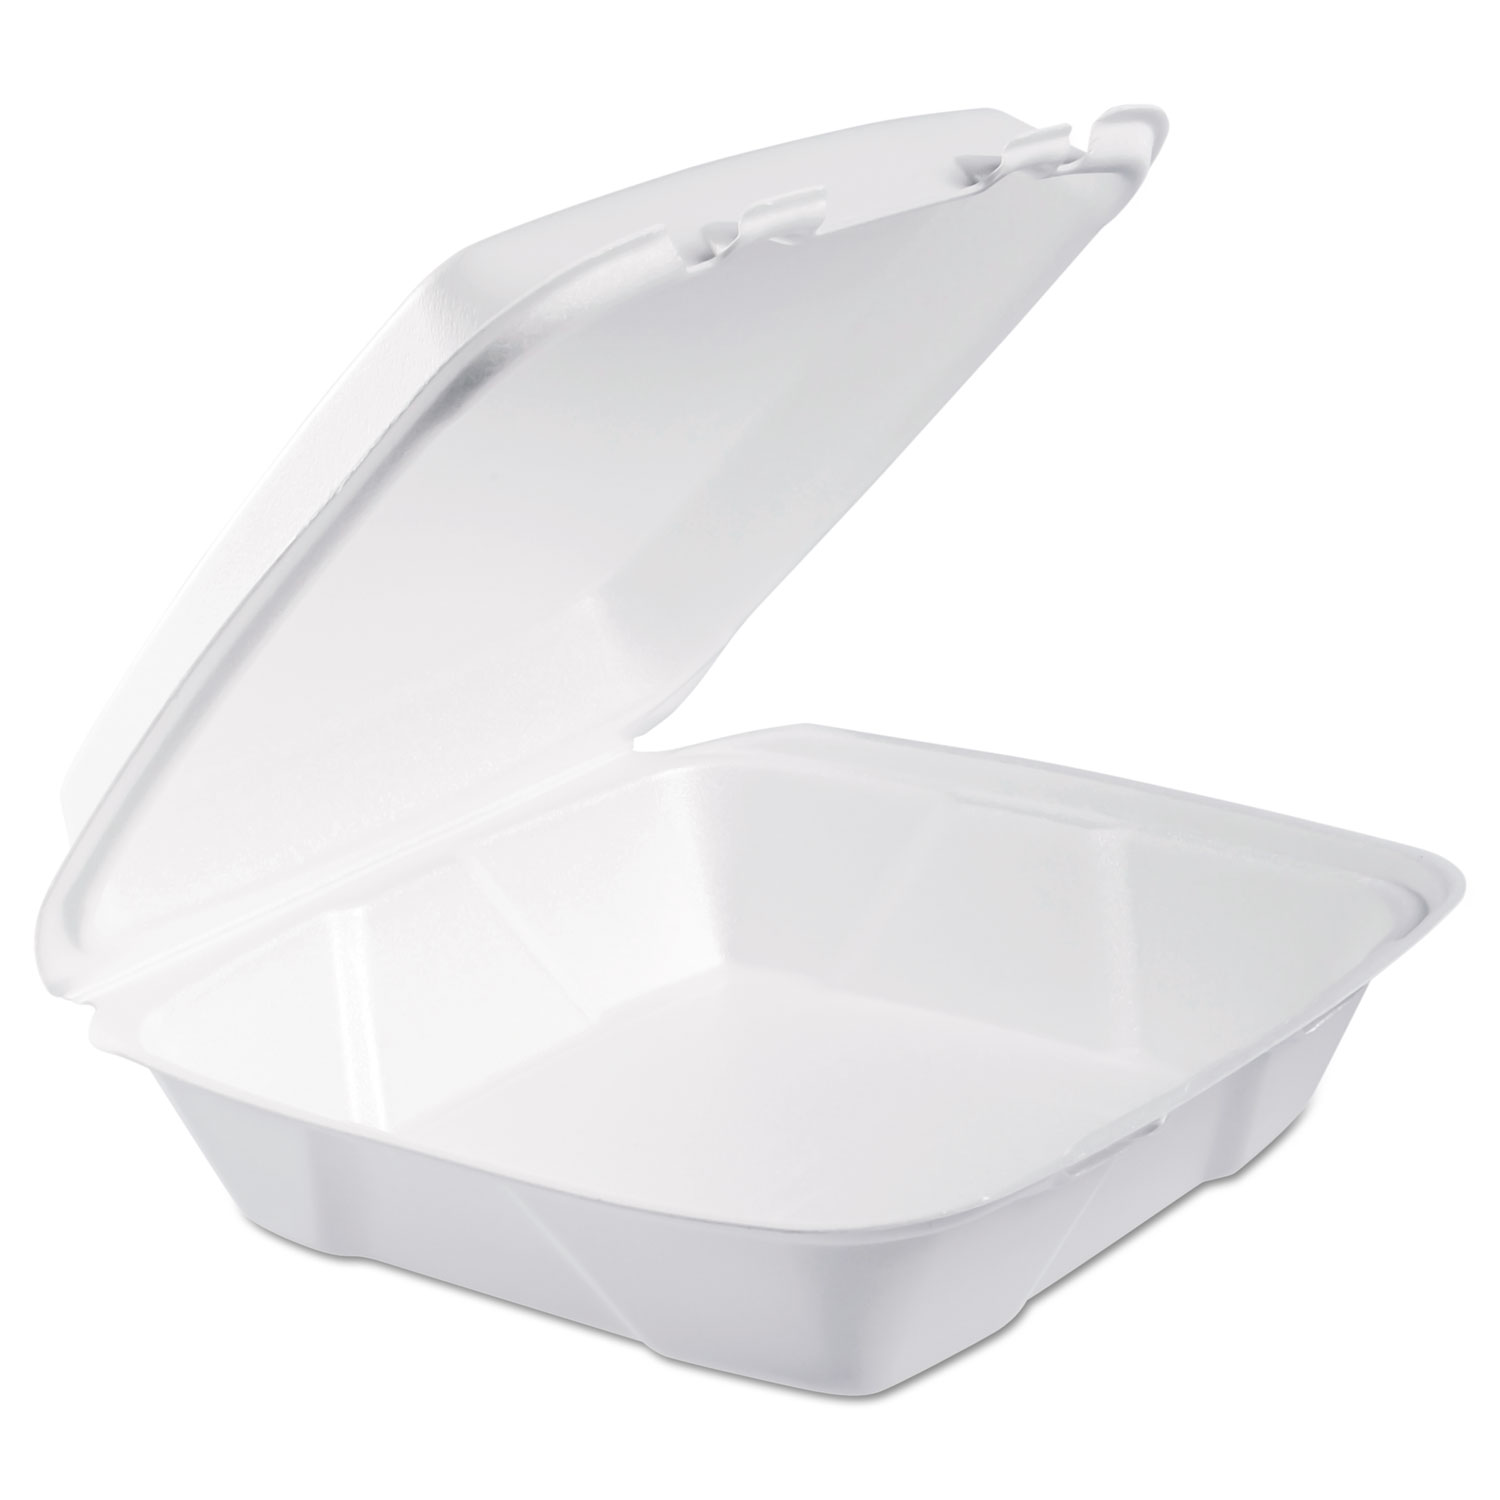  Dart 90HT1R Foam Hinged Lid Containers, 9.375 x 9.375 x 3, White, 200/Carton (DCC90HT1R) 